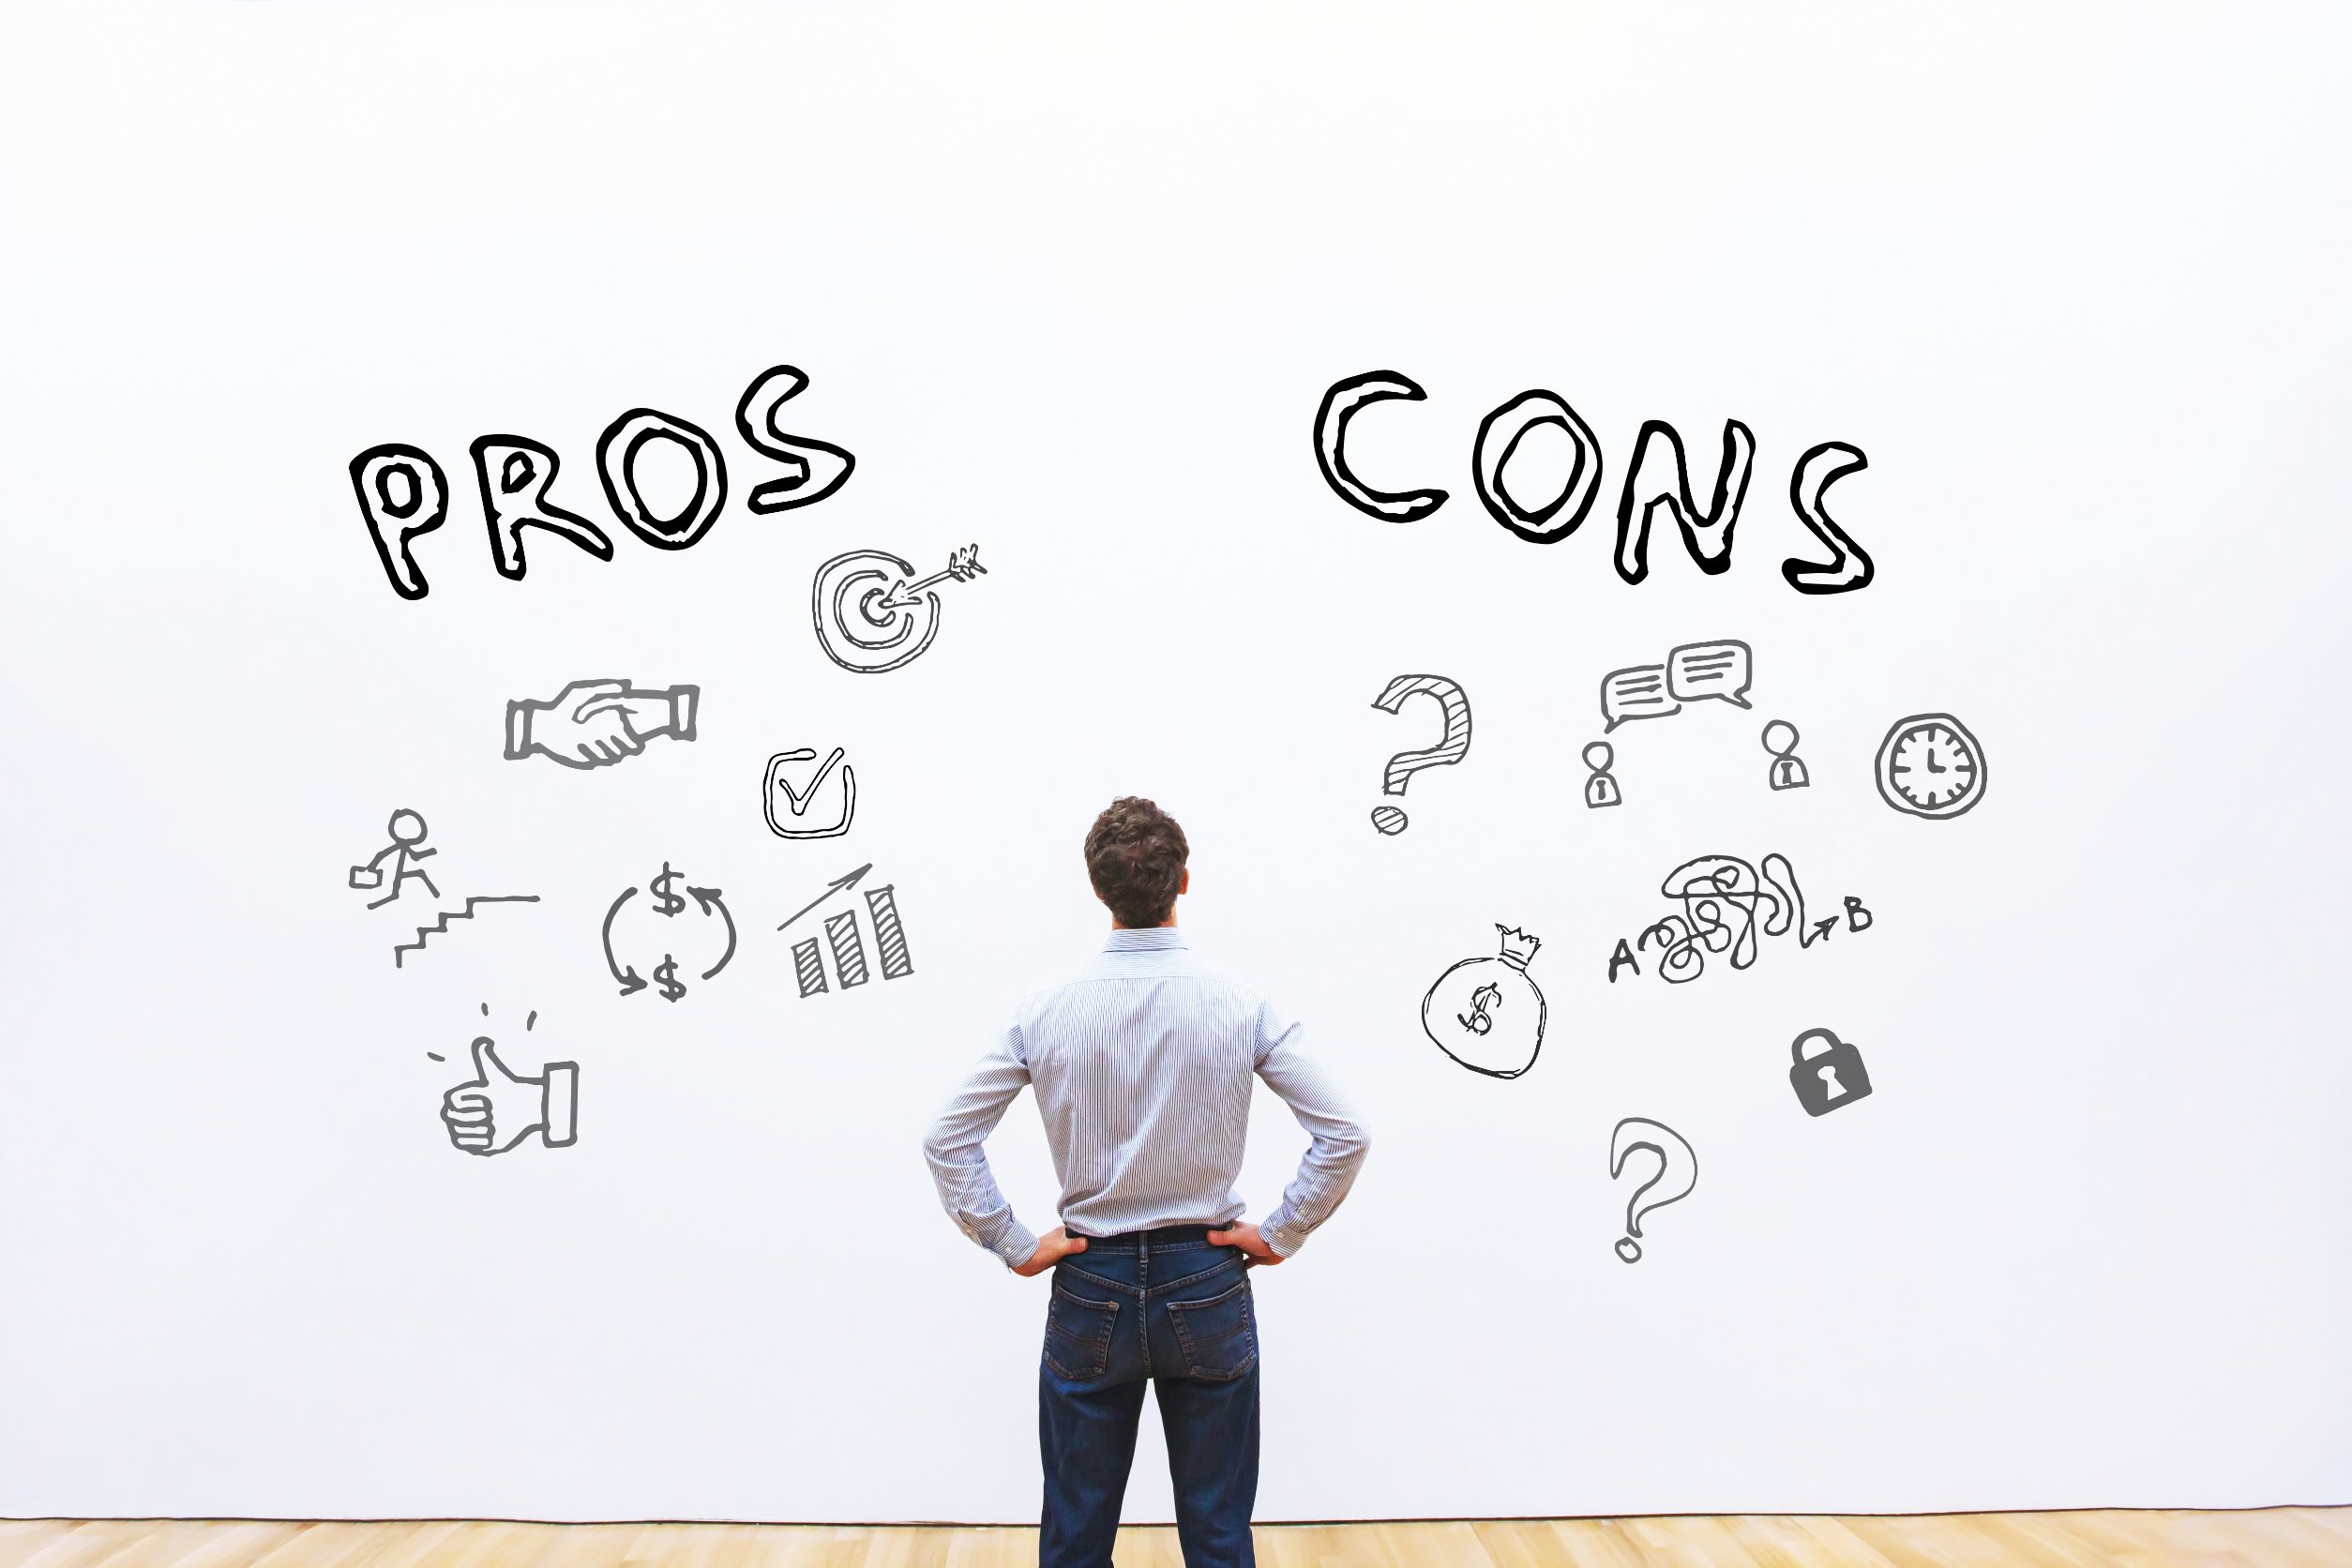 The Pros and Cons of Going into Business for Yourself